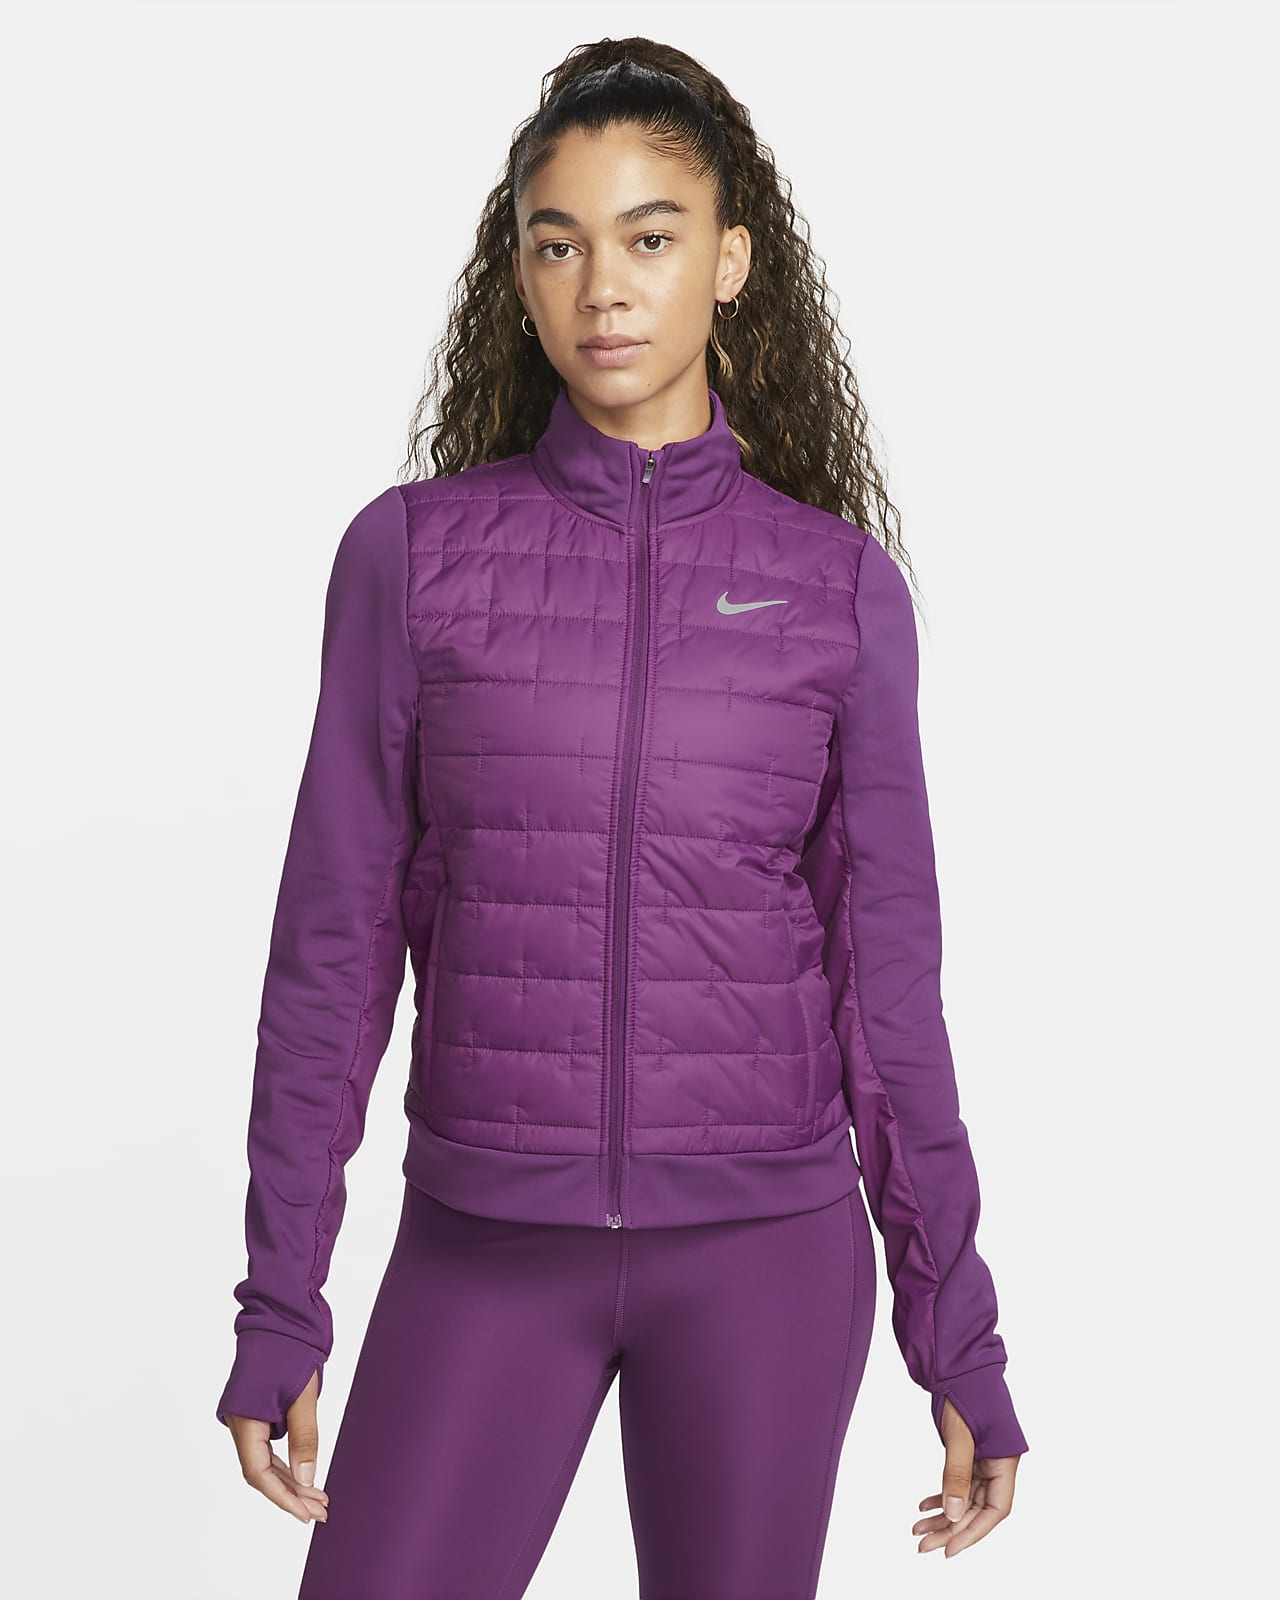 Nike Therma-FIT Women's Fill Jacket. CA